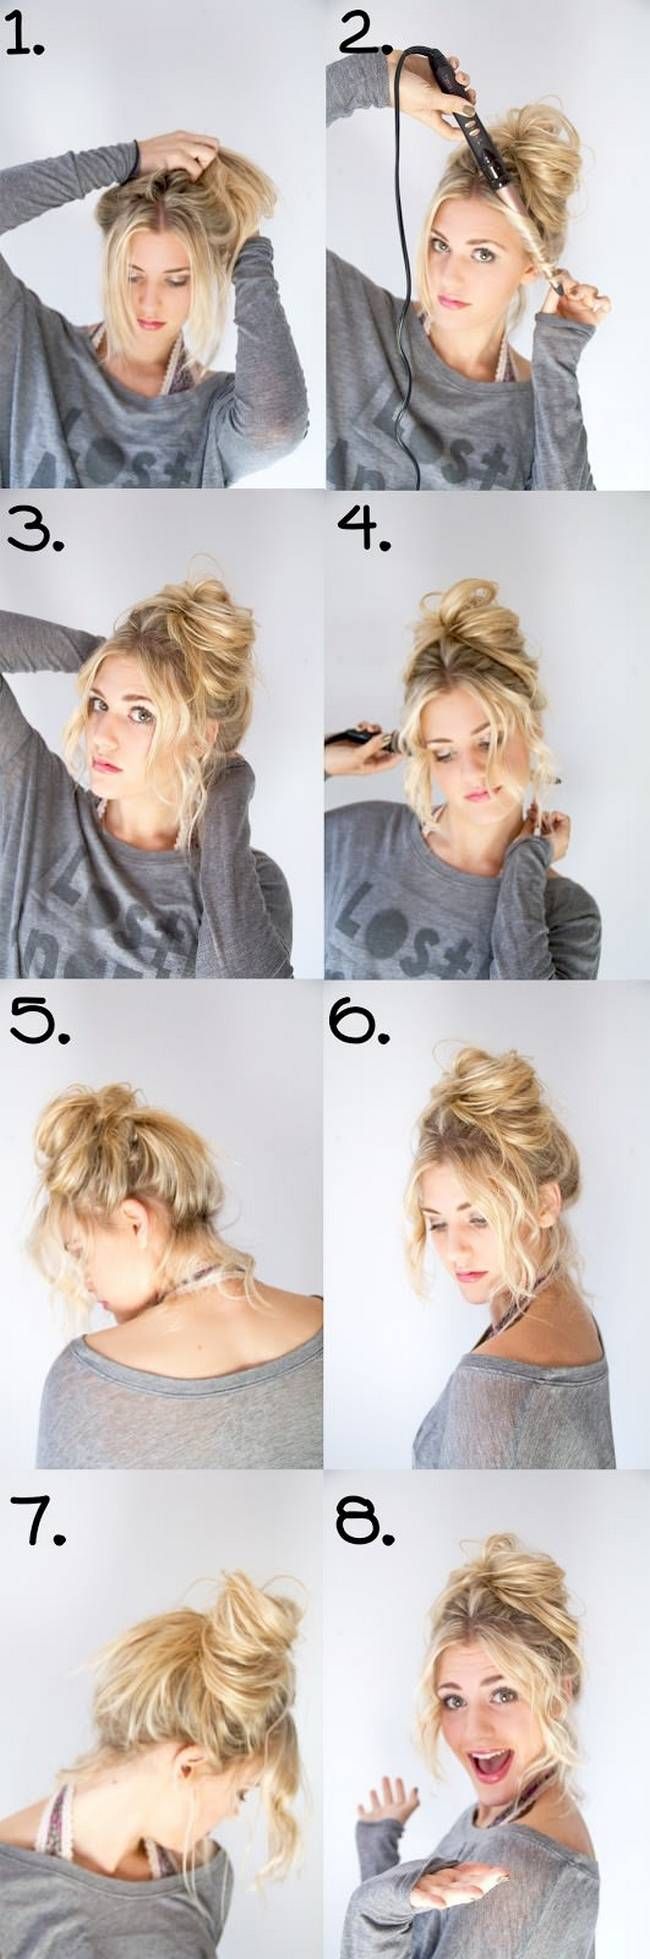 Top Bun with Side Part